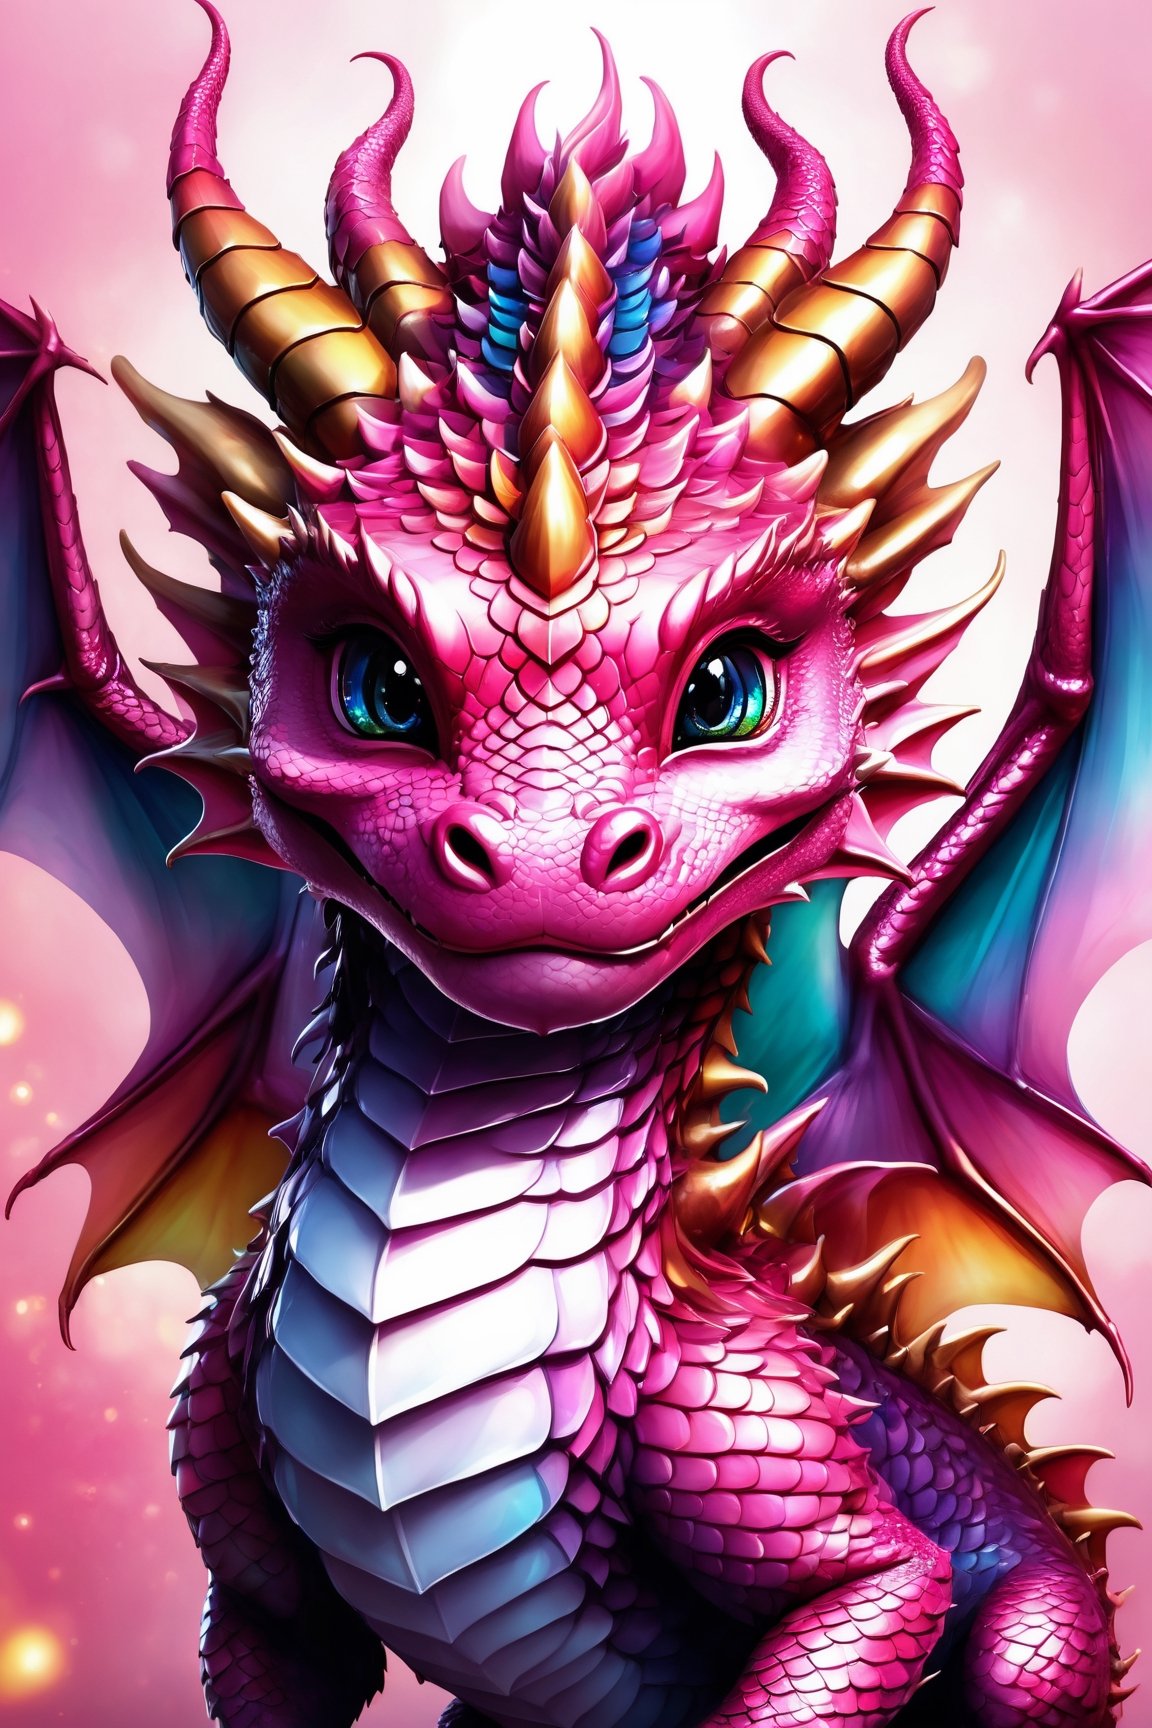 (best quality,8K,highres,masterpiece), ultra-detailed, (super colorful, pink dragon face), depicting the enchanting visage of a baby dragon girl. Her radiant pink scales glisten with vibrancy as she gazes at the viewer with a warm smile. Set against a simple yet striking white background, this illustration focuses on her charming face, showcasing her sparkling black eyes and the magnificent wings and head wings that frame her expression. The dragon's appearance is reminiscent of a delightful creature from the world of Pokémon, harmoniously fused with fantastical elements and a mesmerizing array of vivid pink hues, creating a captivating and stunning masterpiece.